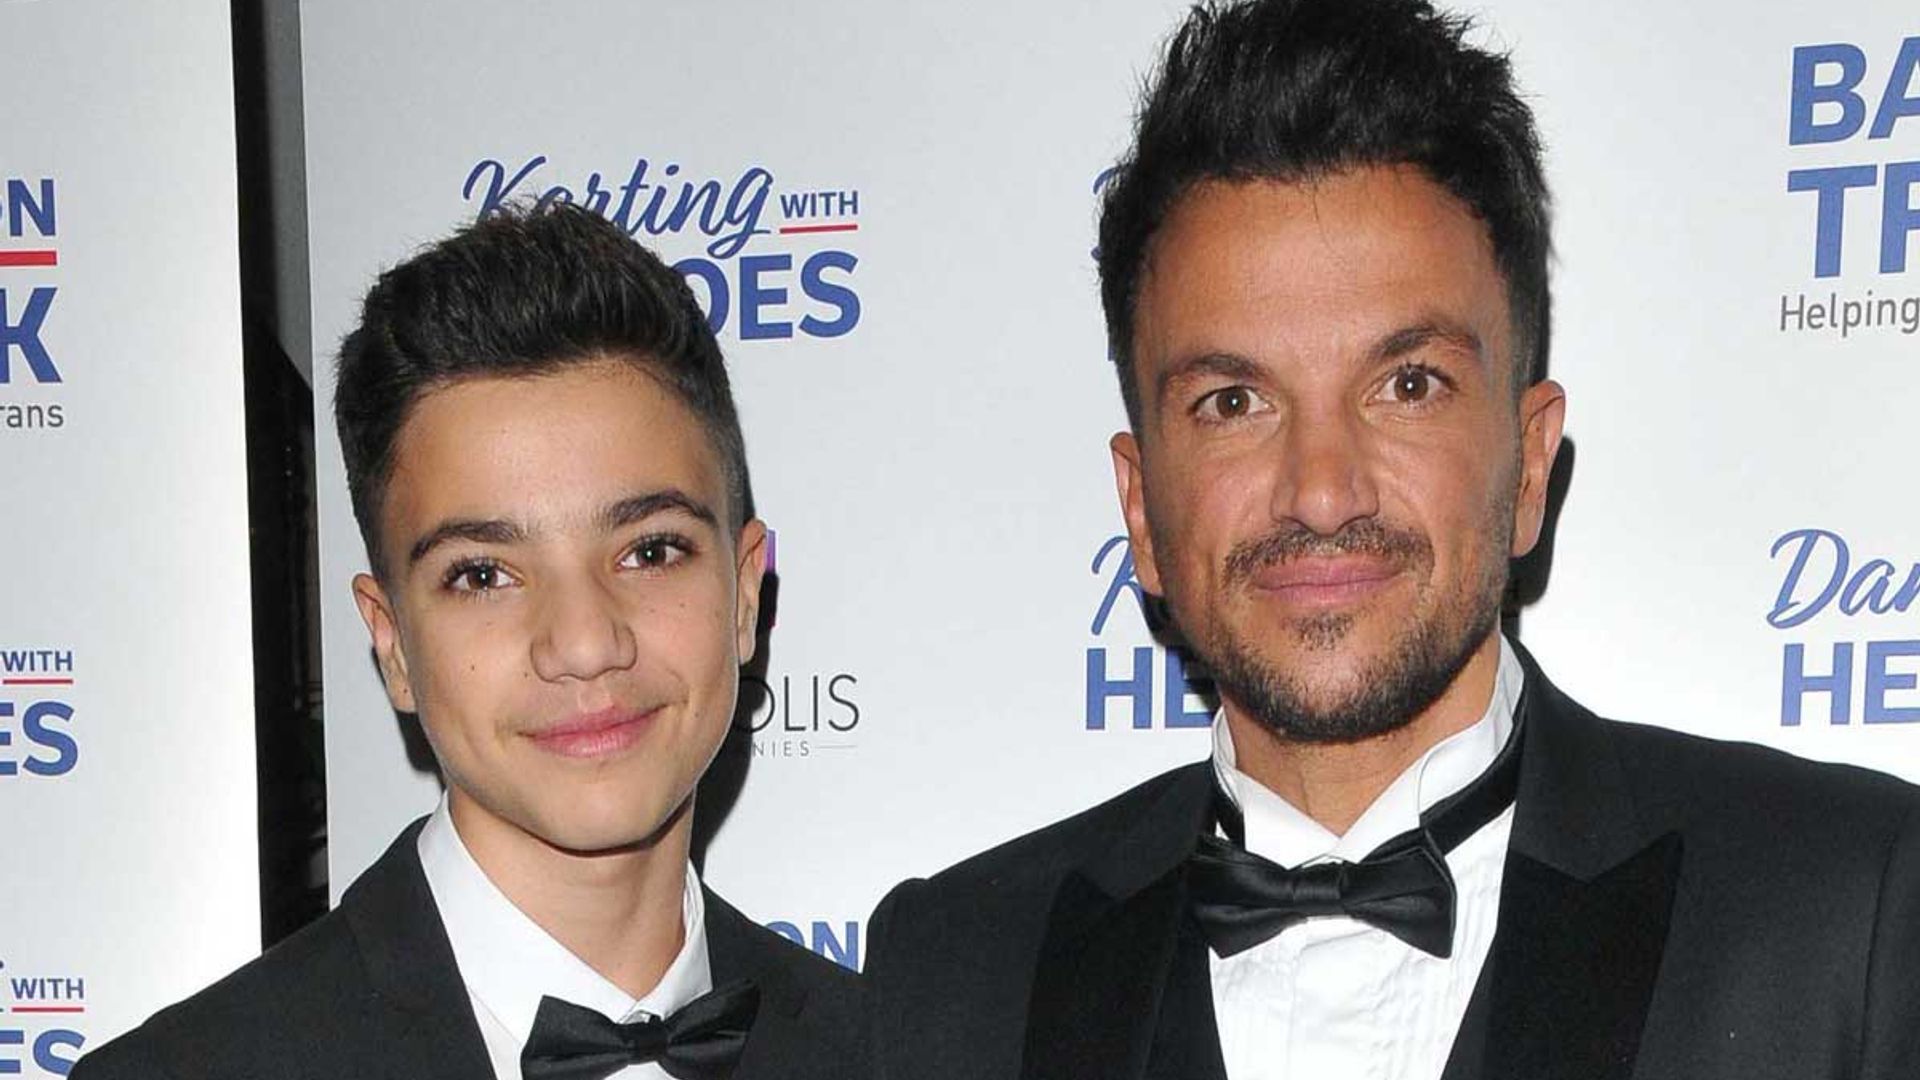 Peter Andre admits he feels 'scared' about son Junior's first day of college